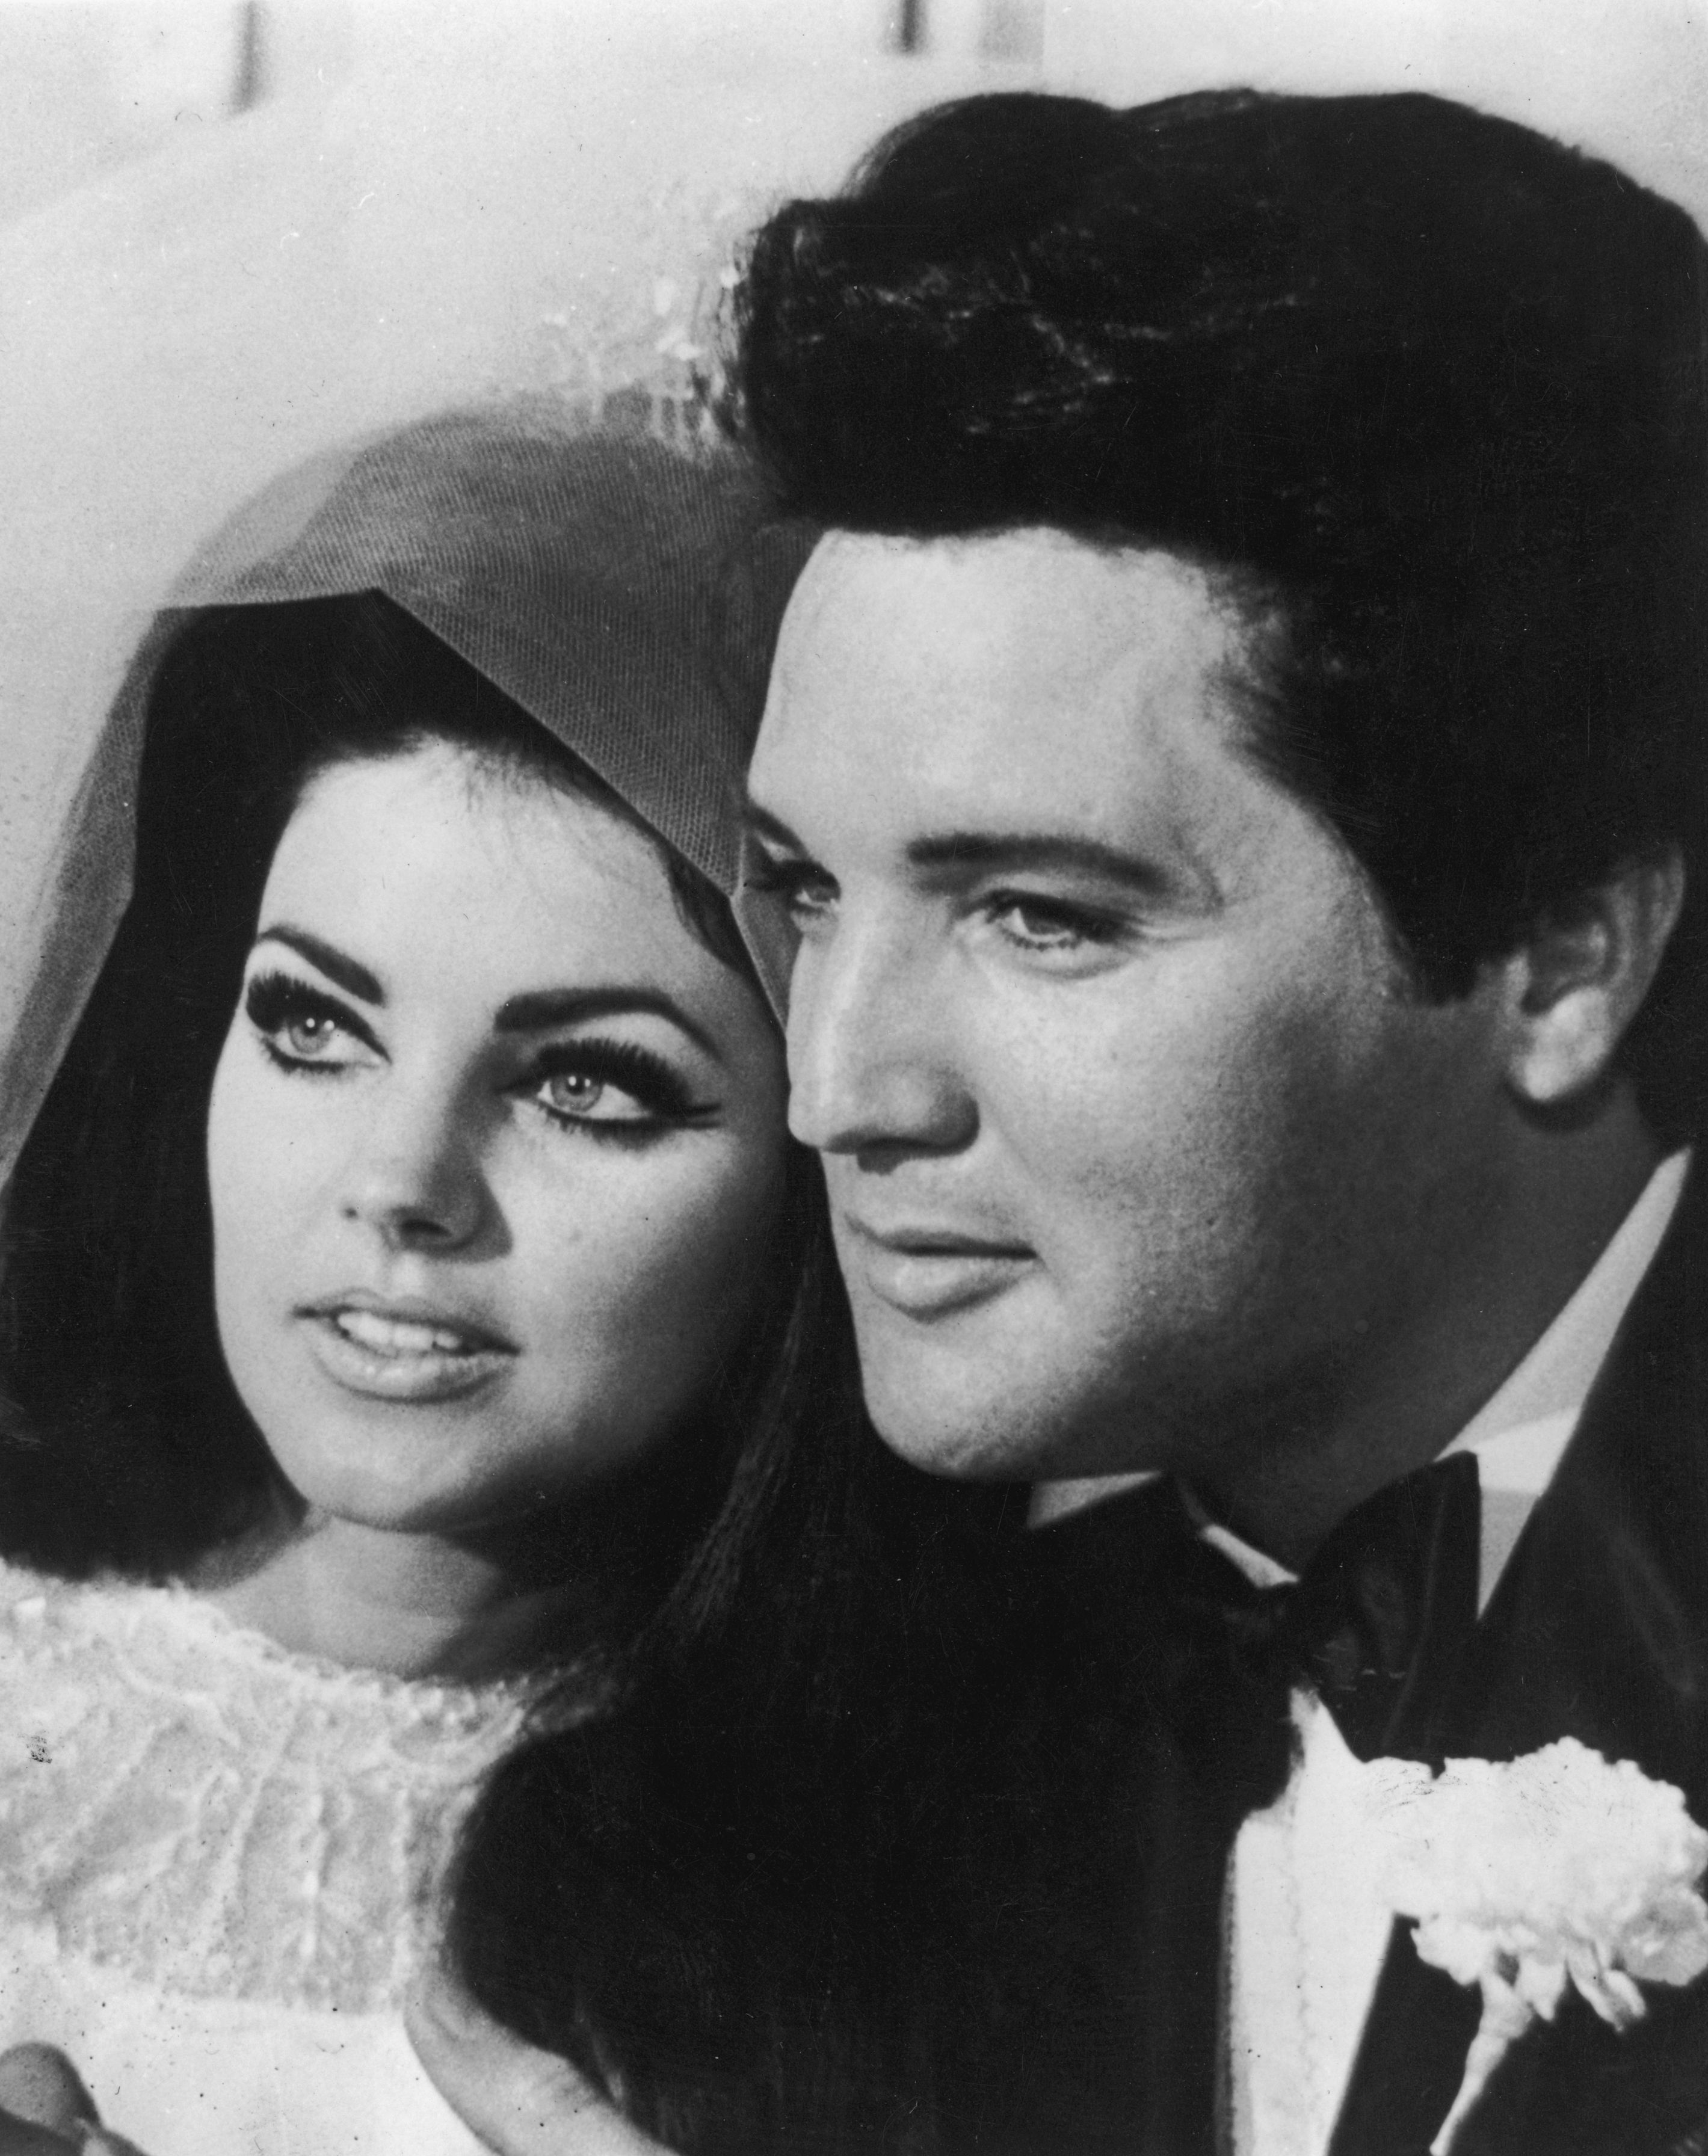 Priscilla Beaulieu and Elvis Presley after their wedding in Las Vegas on May 1, 1967. | Source: Keystone/Getty Images